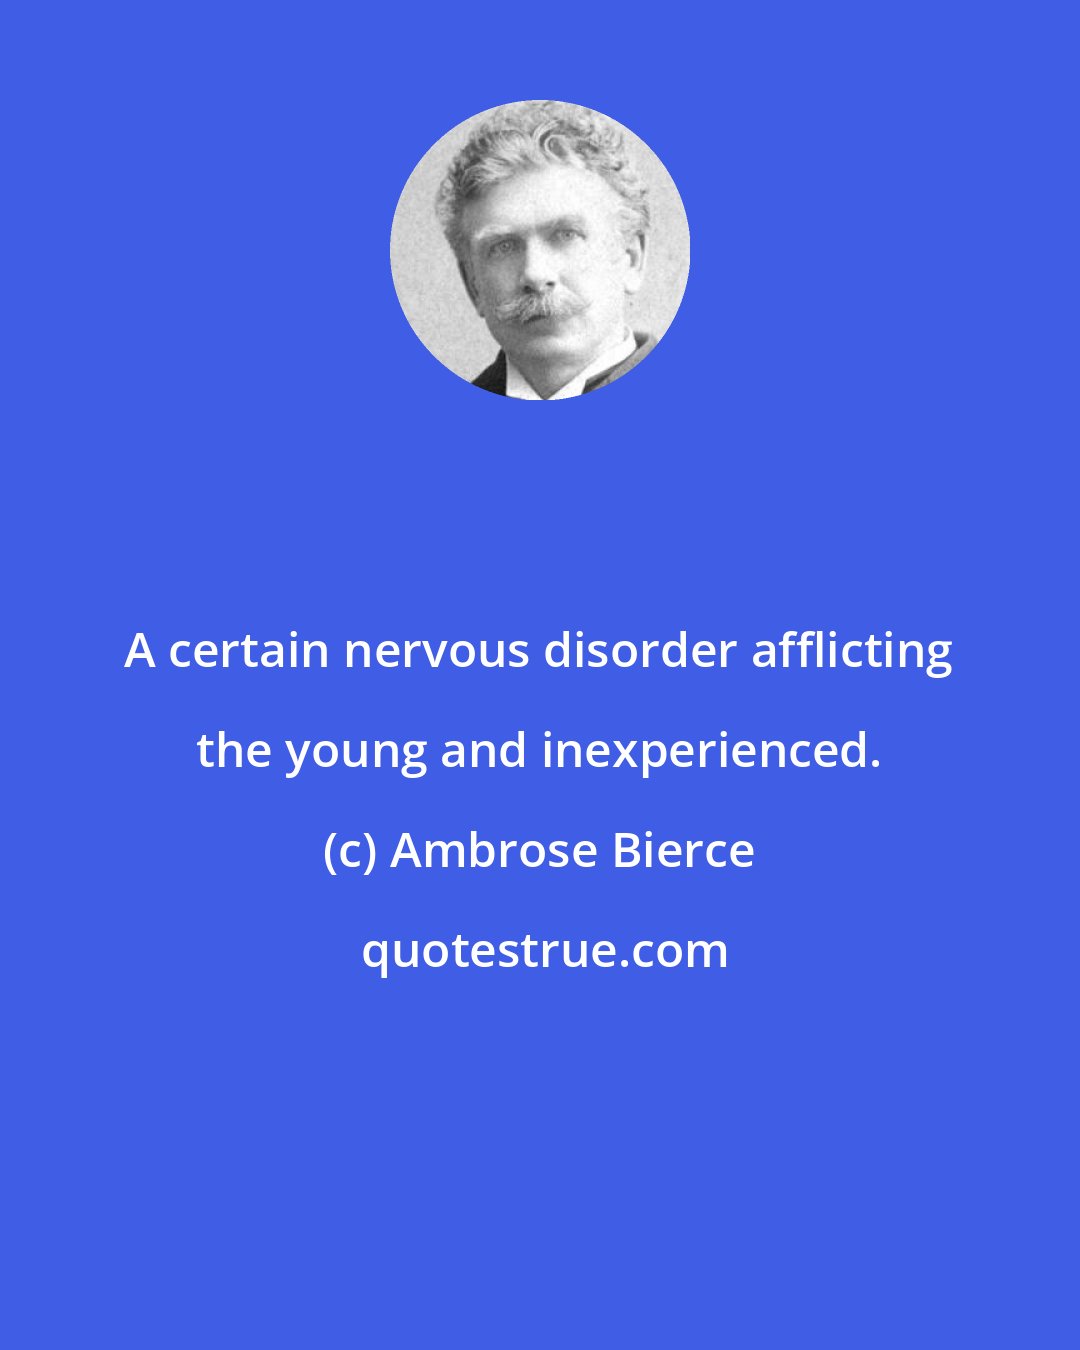 Ambrose Bierce: A certain nervous disorder afflicting the young and inexperienced.